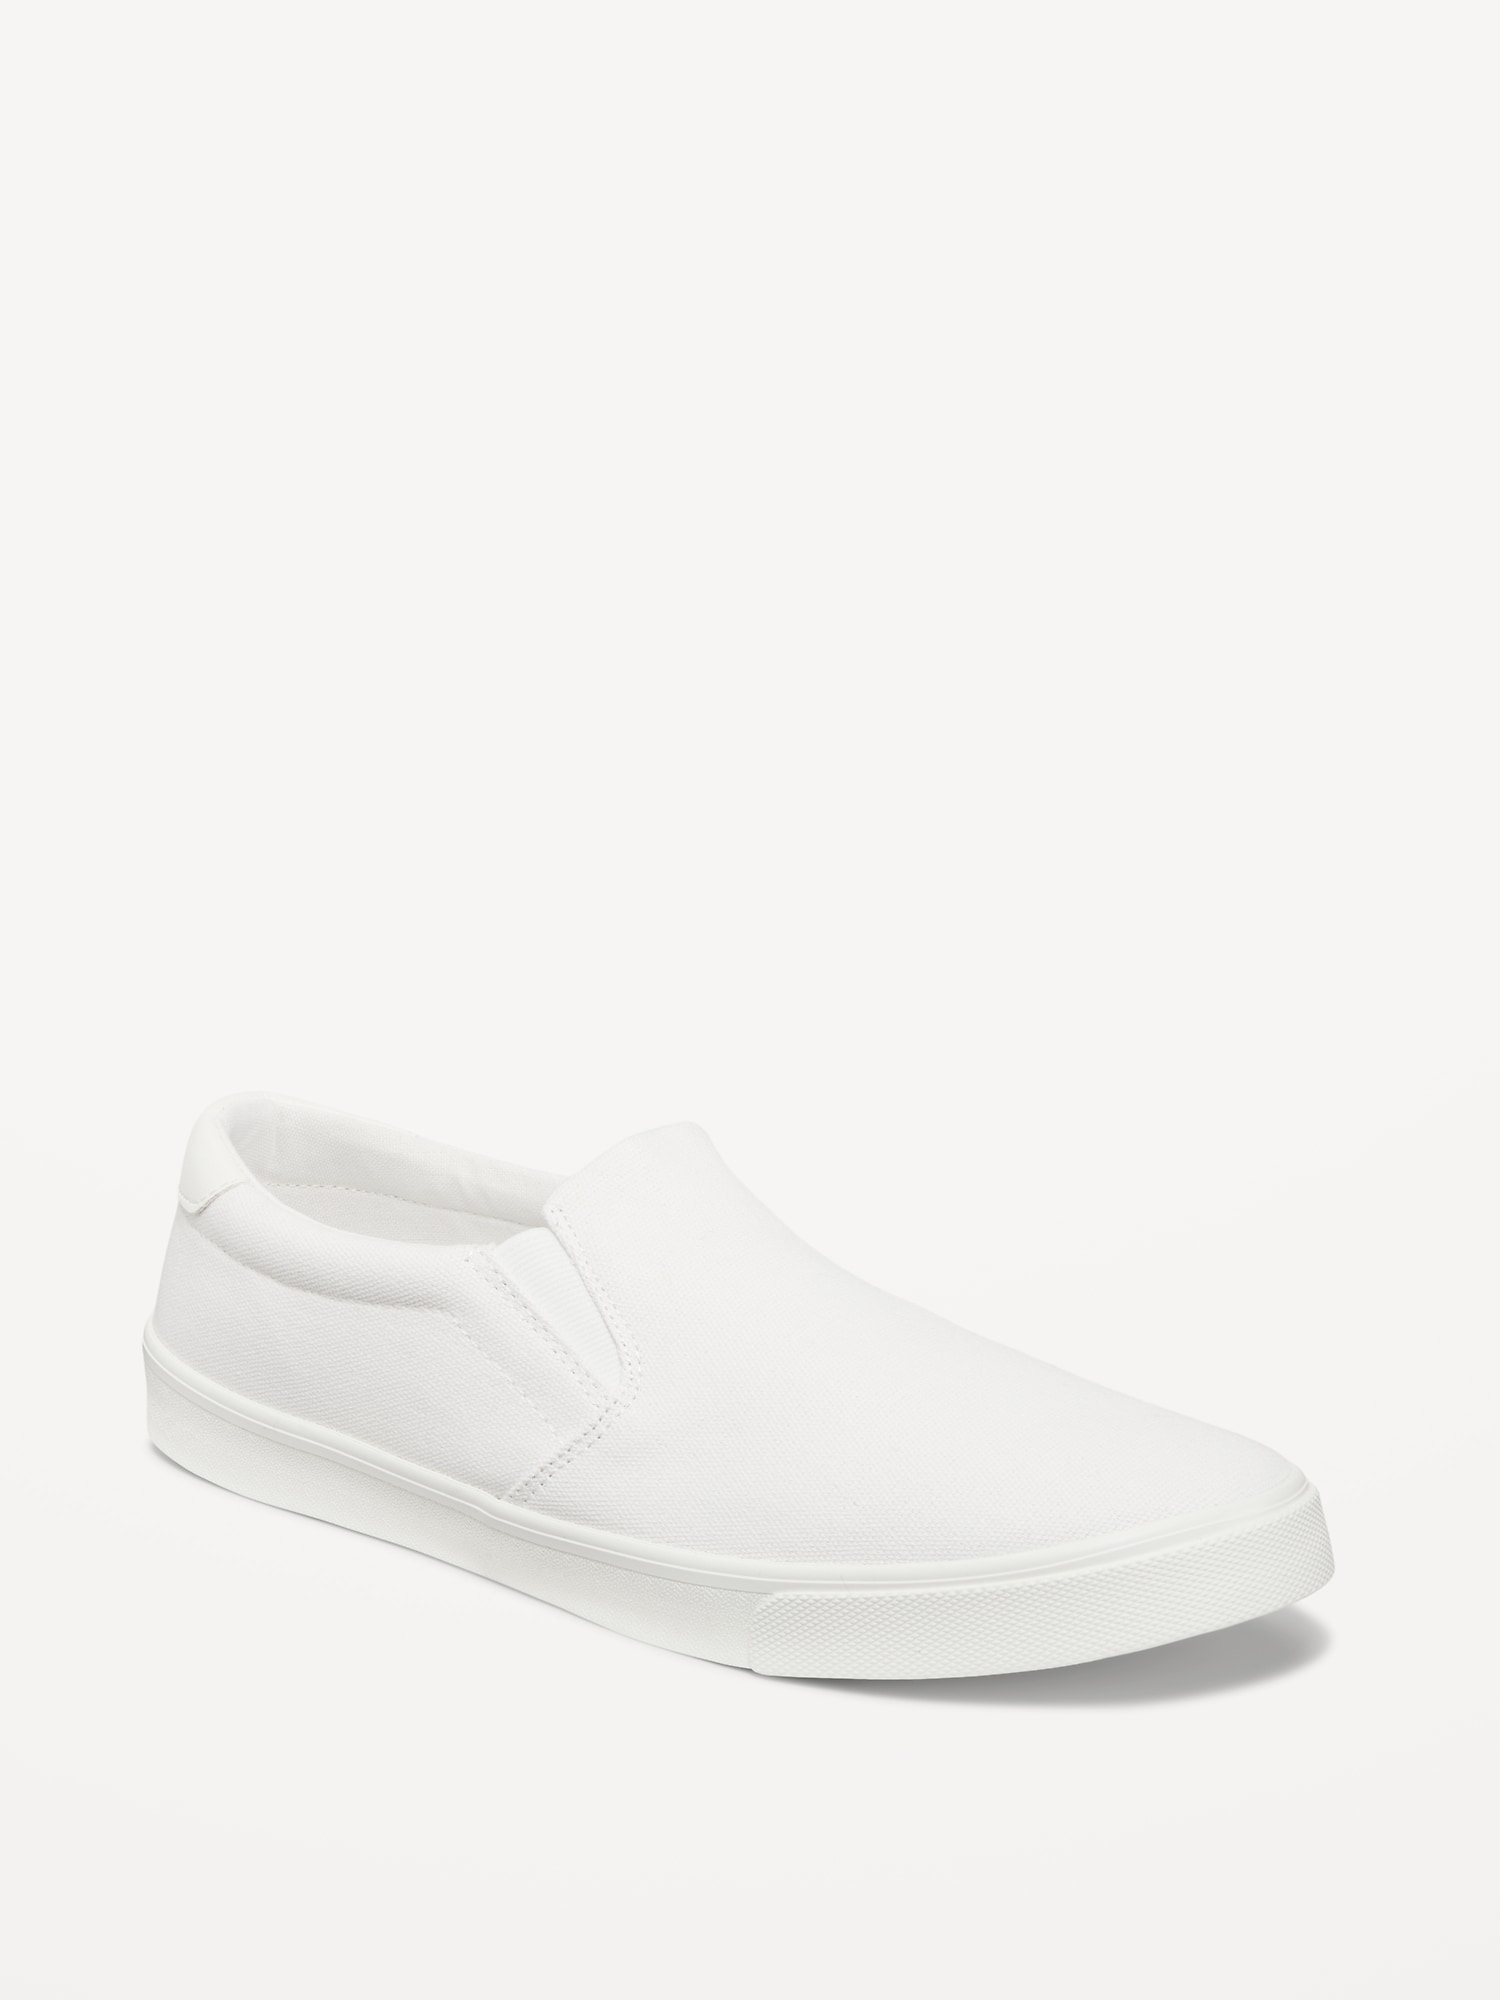 Canvas Slip-Ons | Old Navy